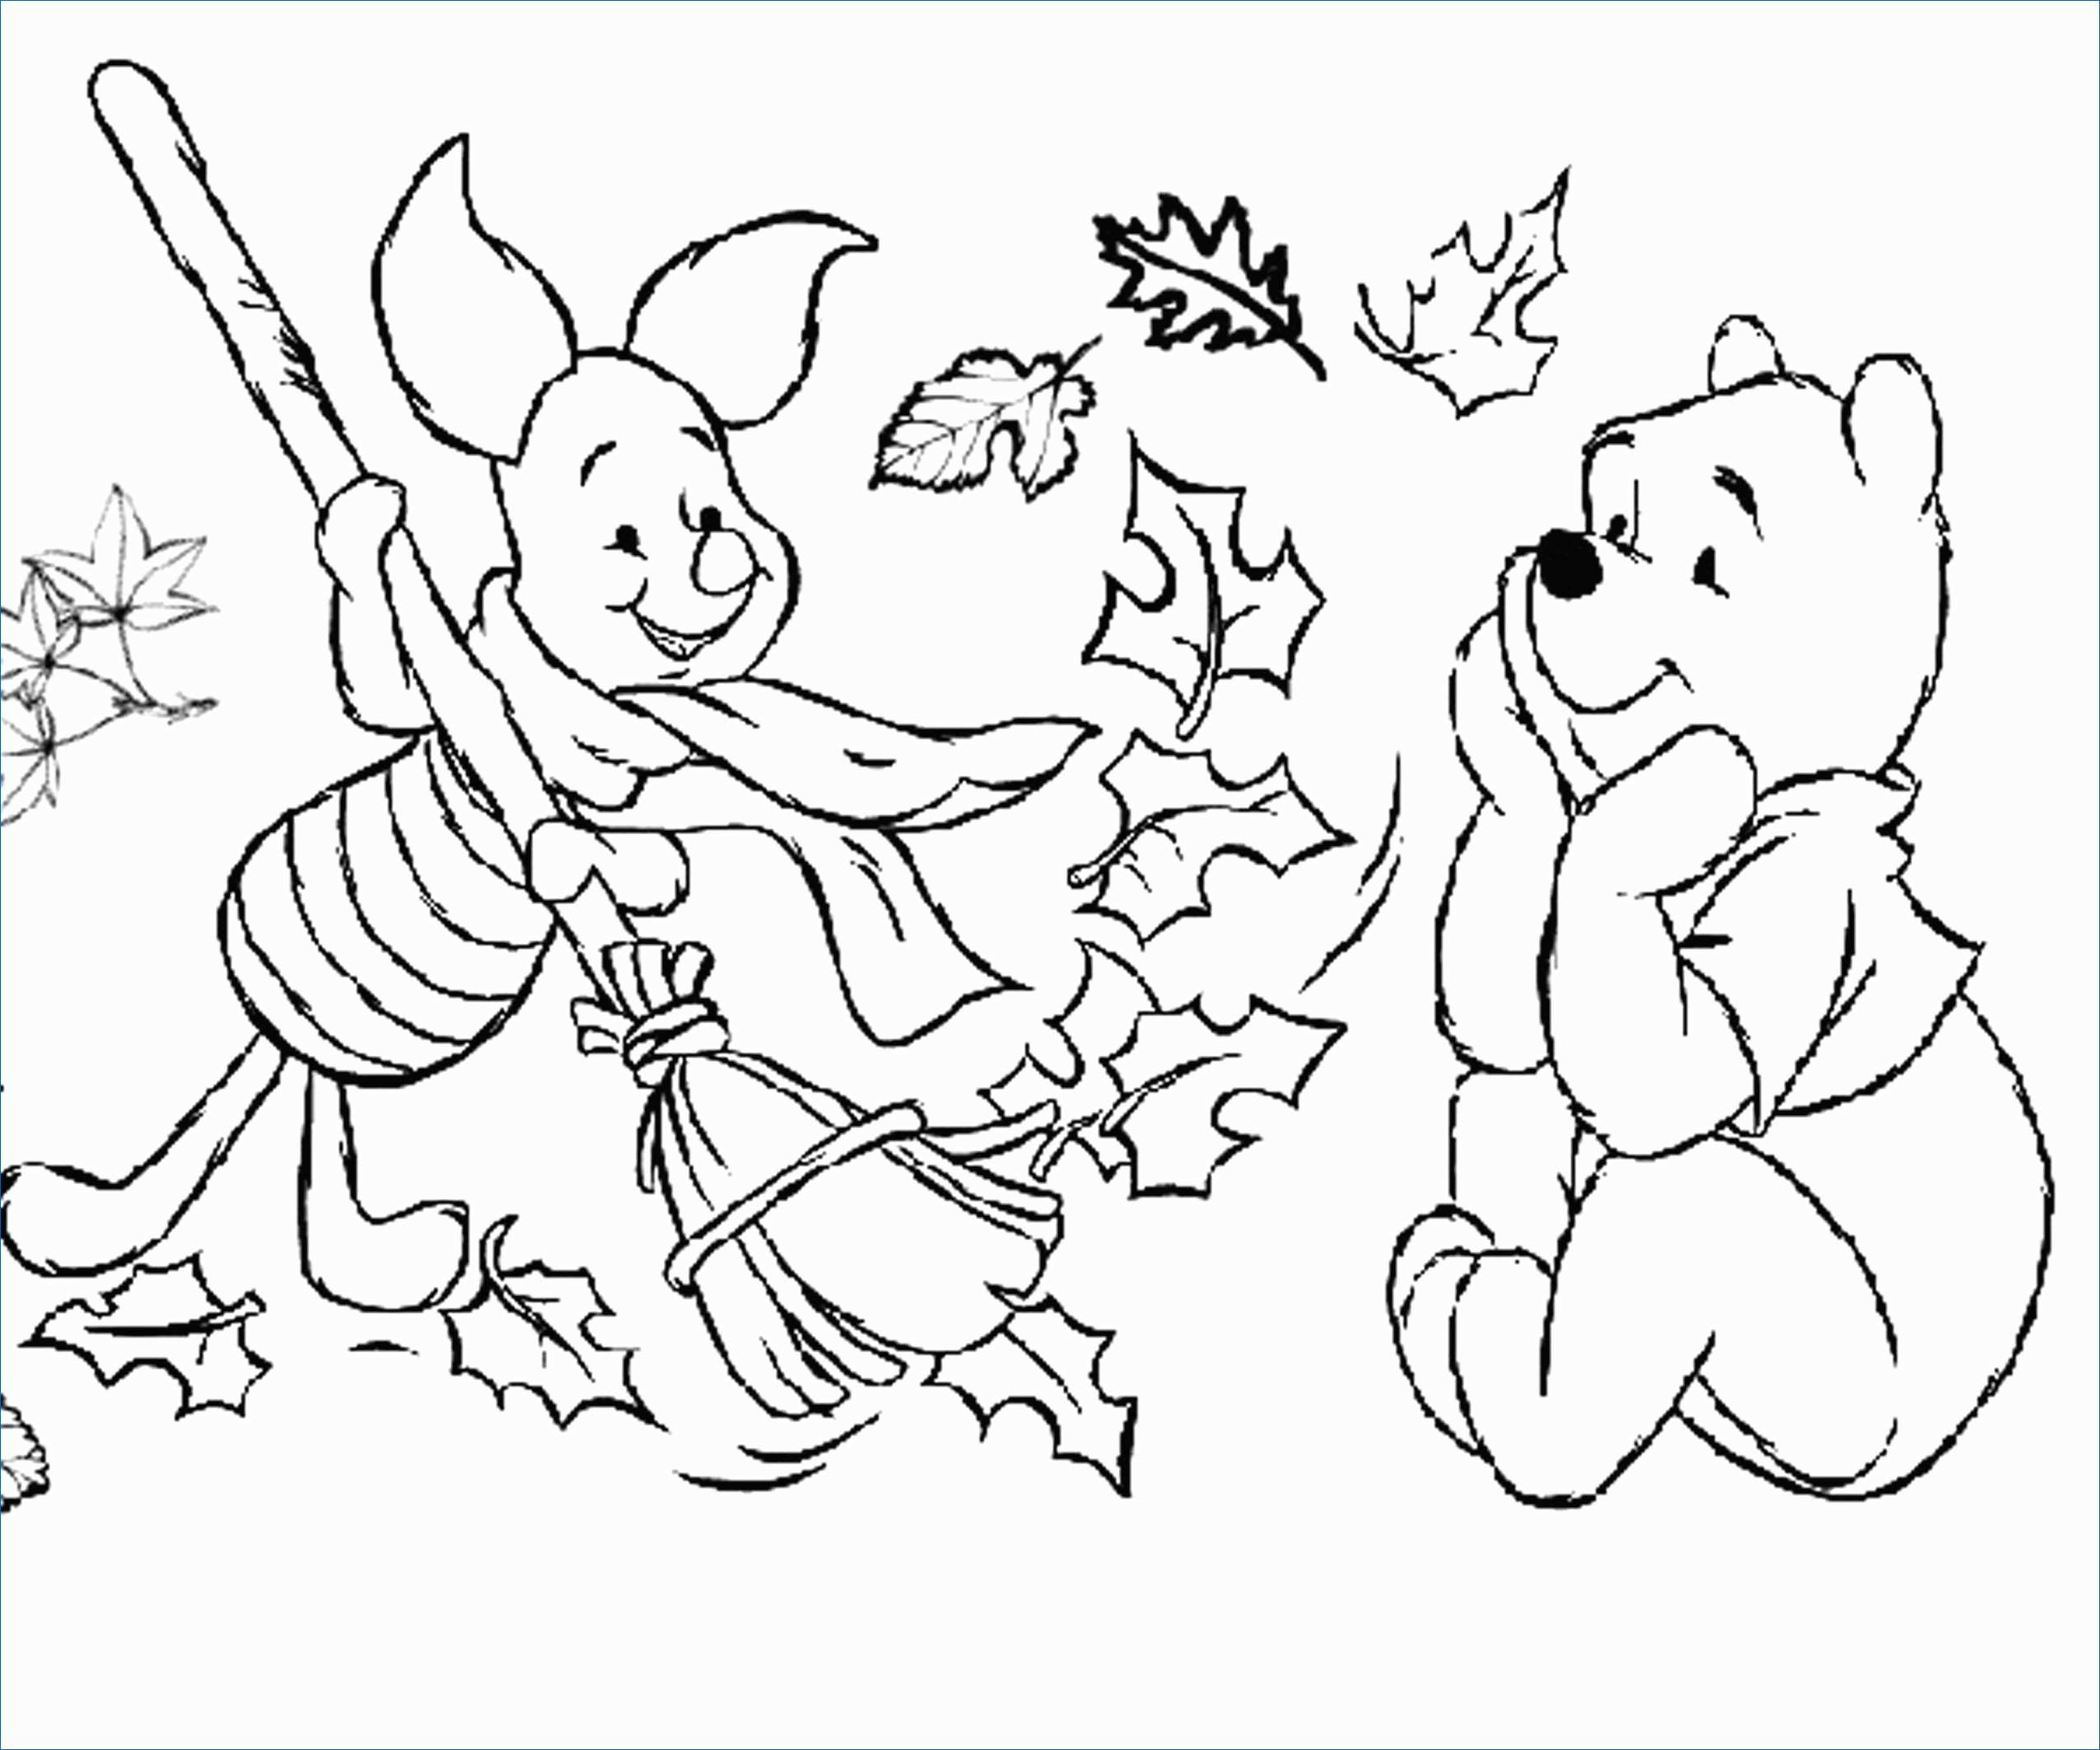 Spanish Christmas Coloring Pages Coloring Ideas Flag Of Spain Coloring Page New Spanish Sheets